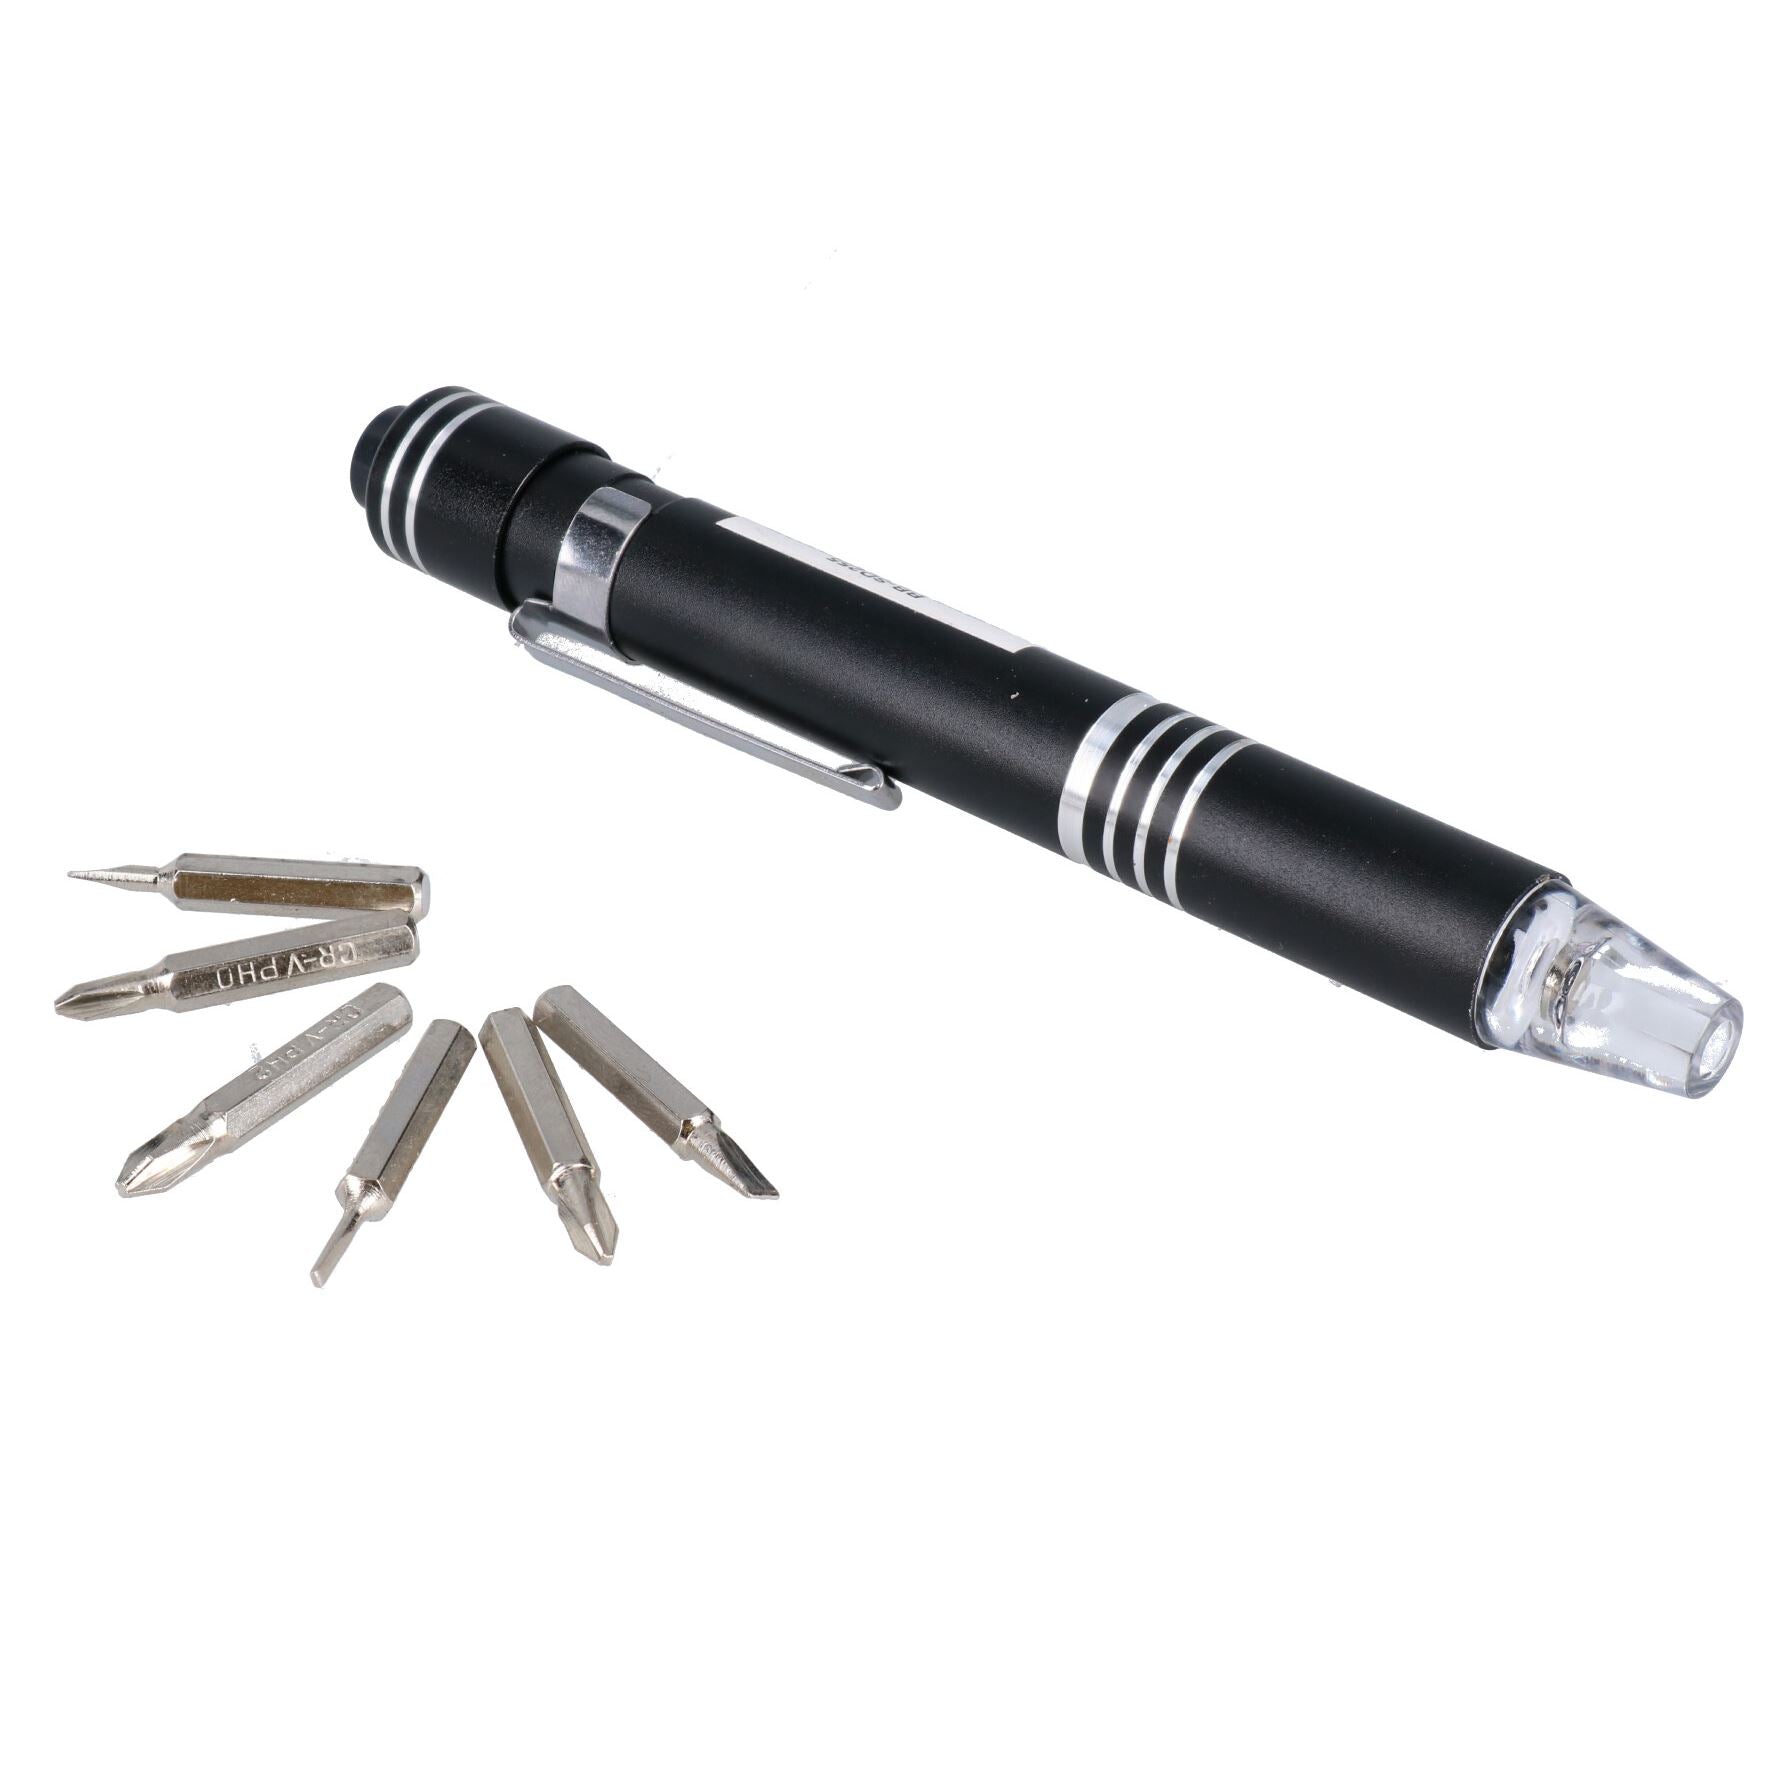 6 in 1 LED Precision Screwdriver Magnetic Pocket Pen Slotted Flathead Phillips